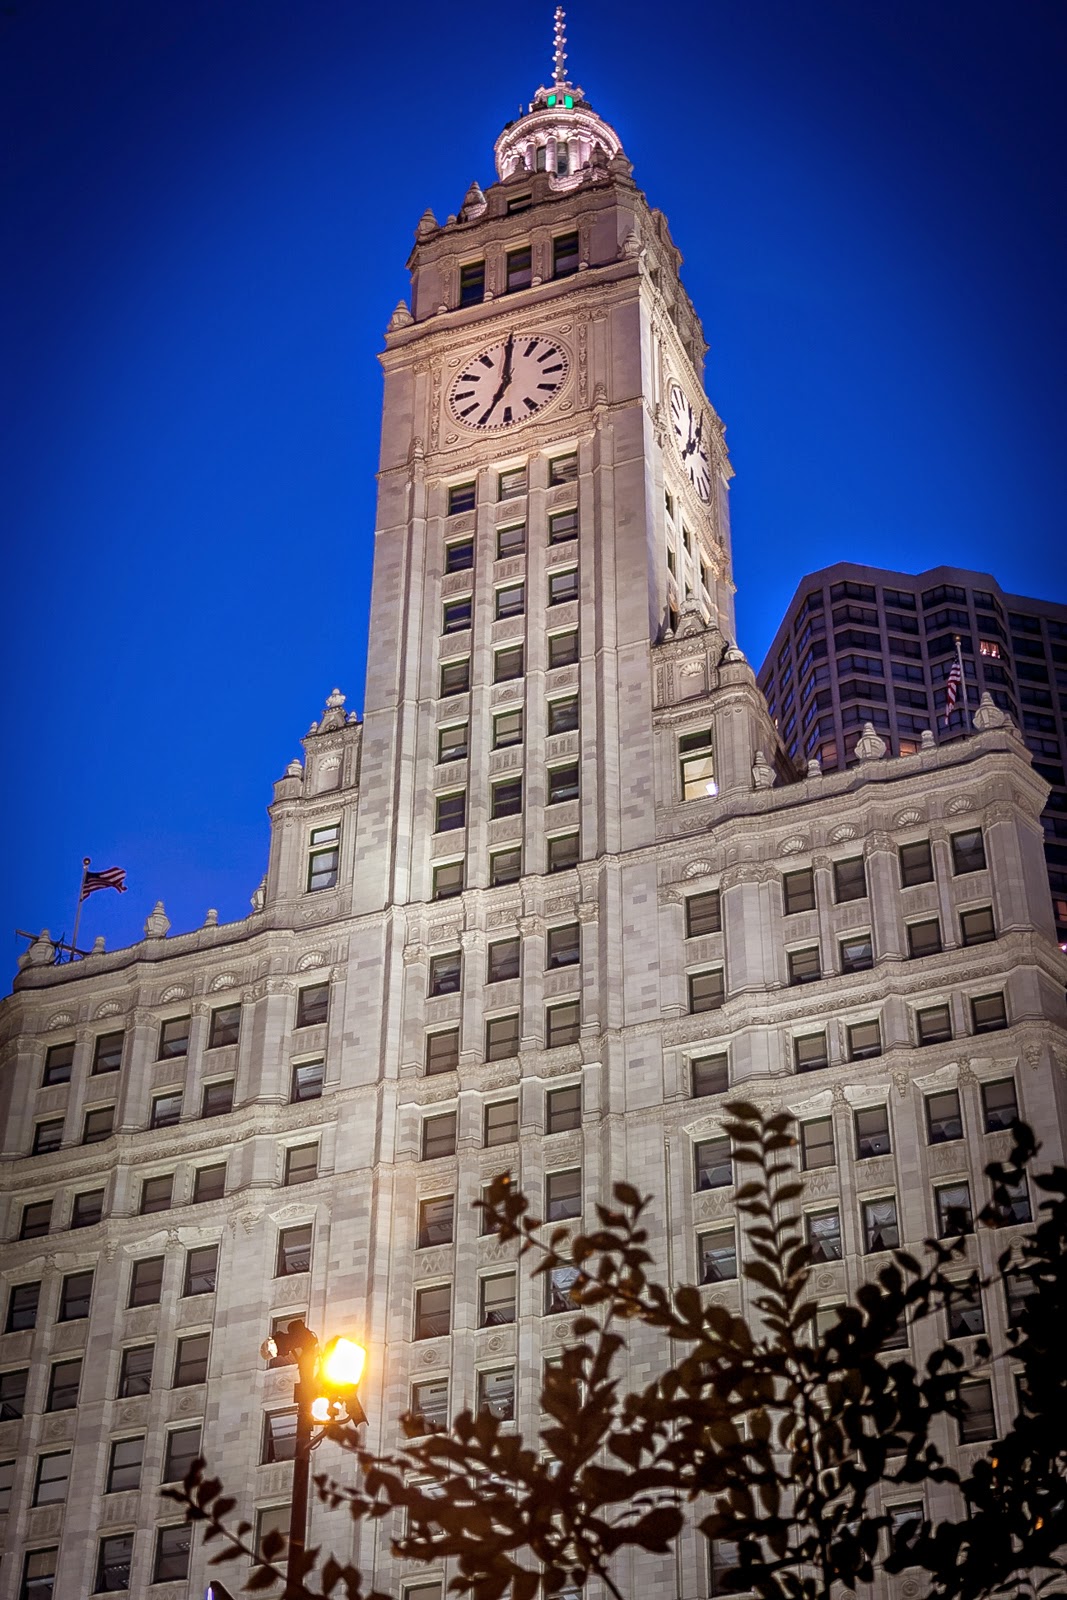 Wrigley Building - Chicago real estate photography, Chicago sports photography